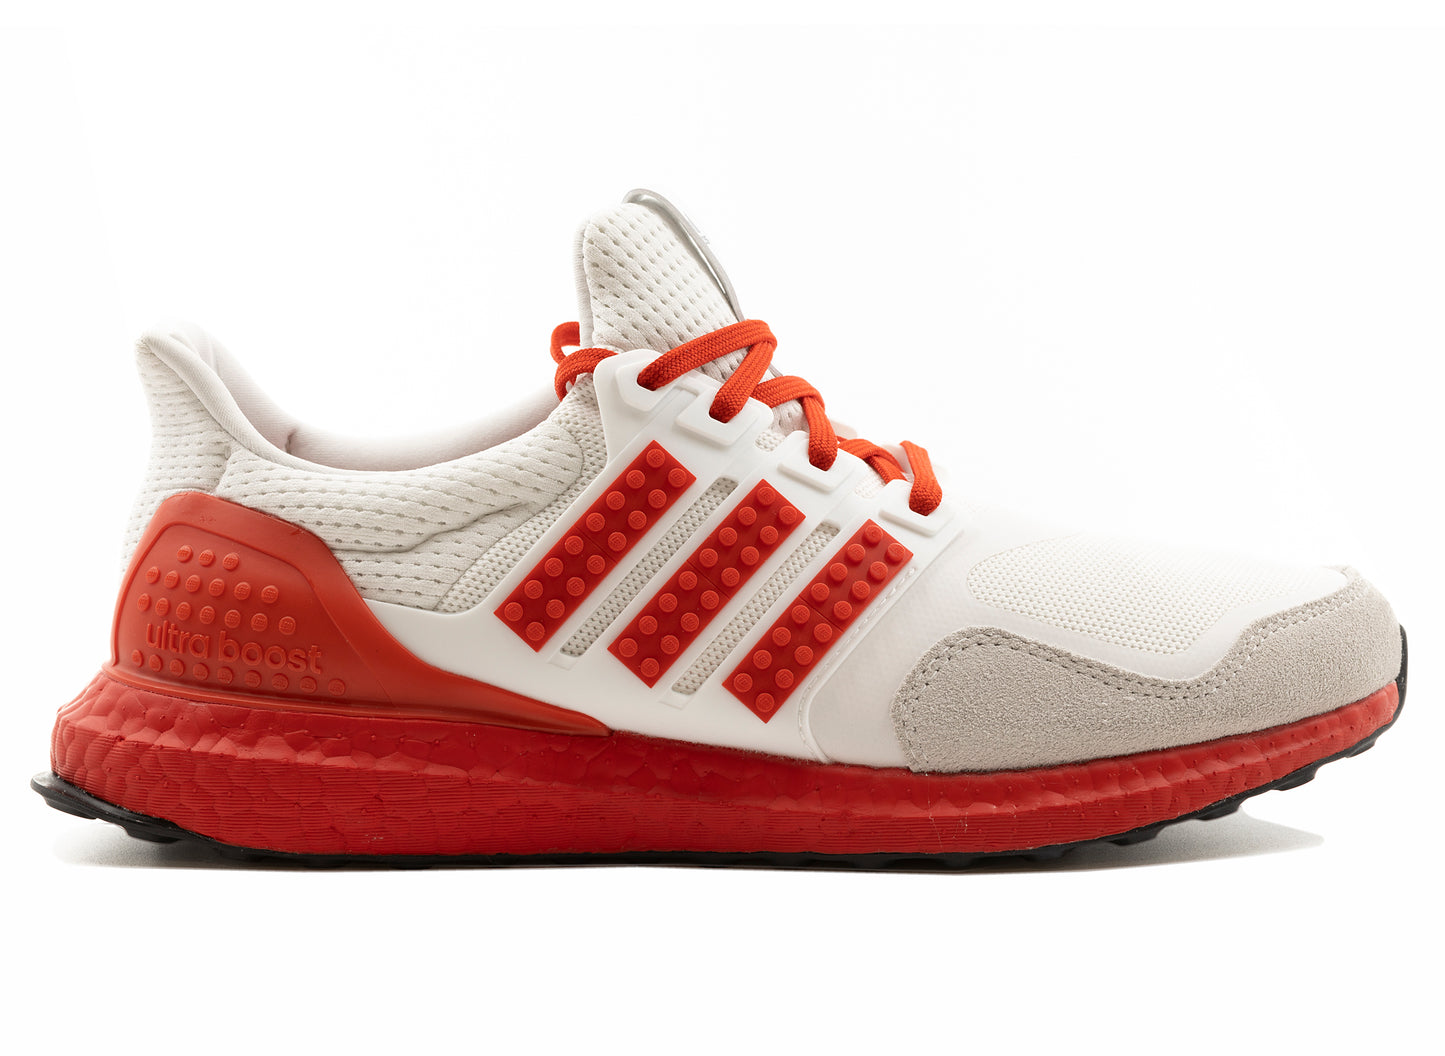 LEGO x Adidas Ultraboost DNA 'Color Pack' - Red